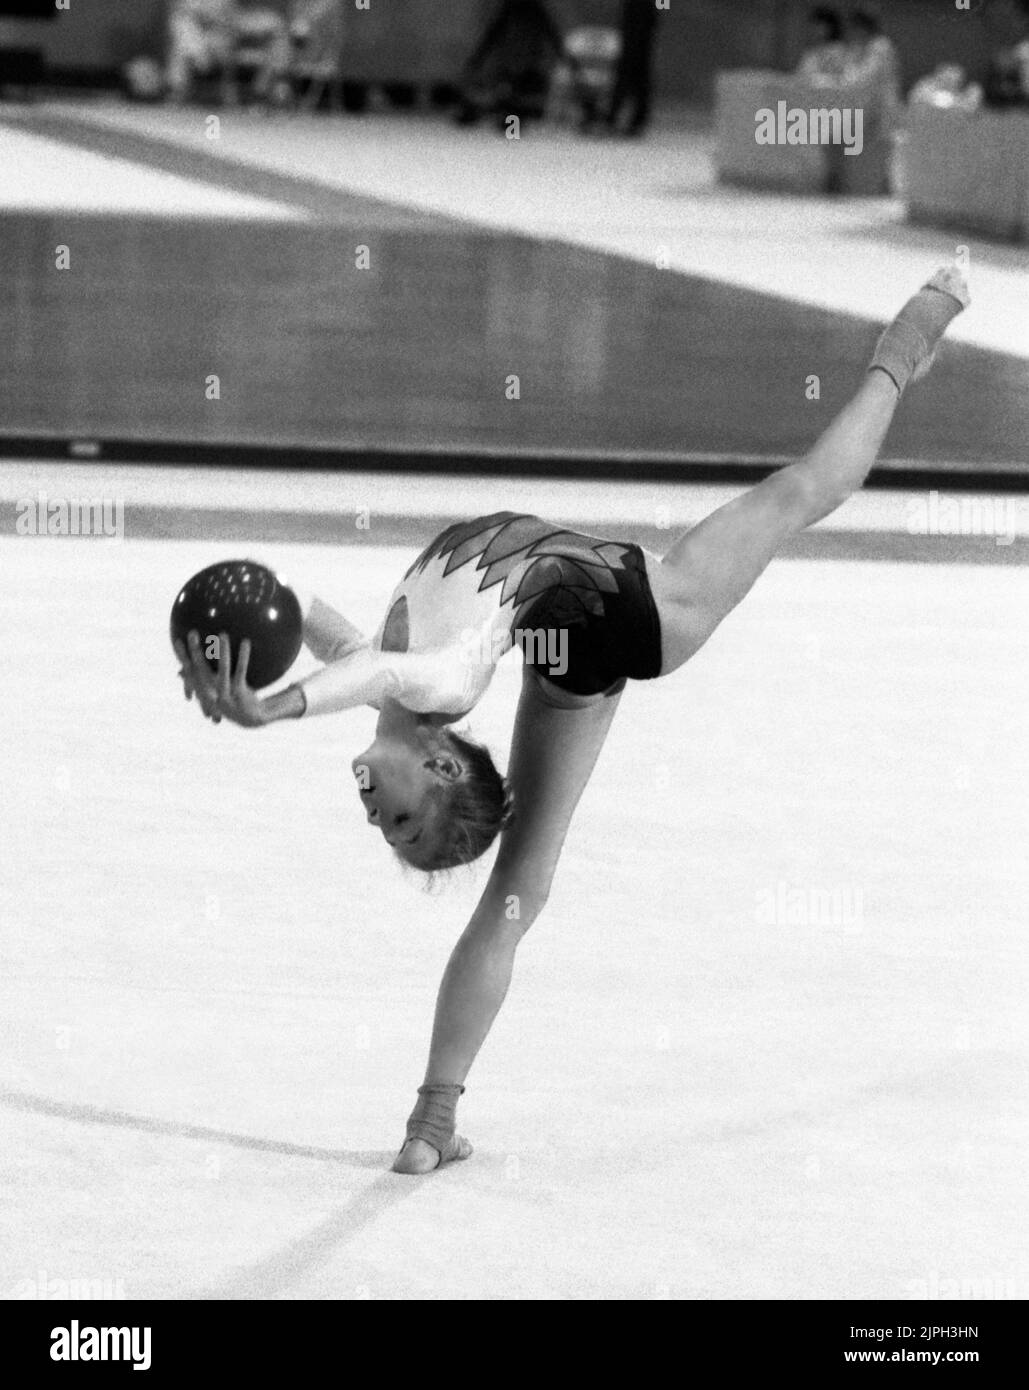 OLYMPIC SUMMER GAMES IN LOS ANGELES 1984RHYTHMICS GYMNASTICS perform with a ball Stock Photo